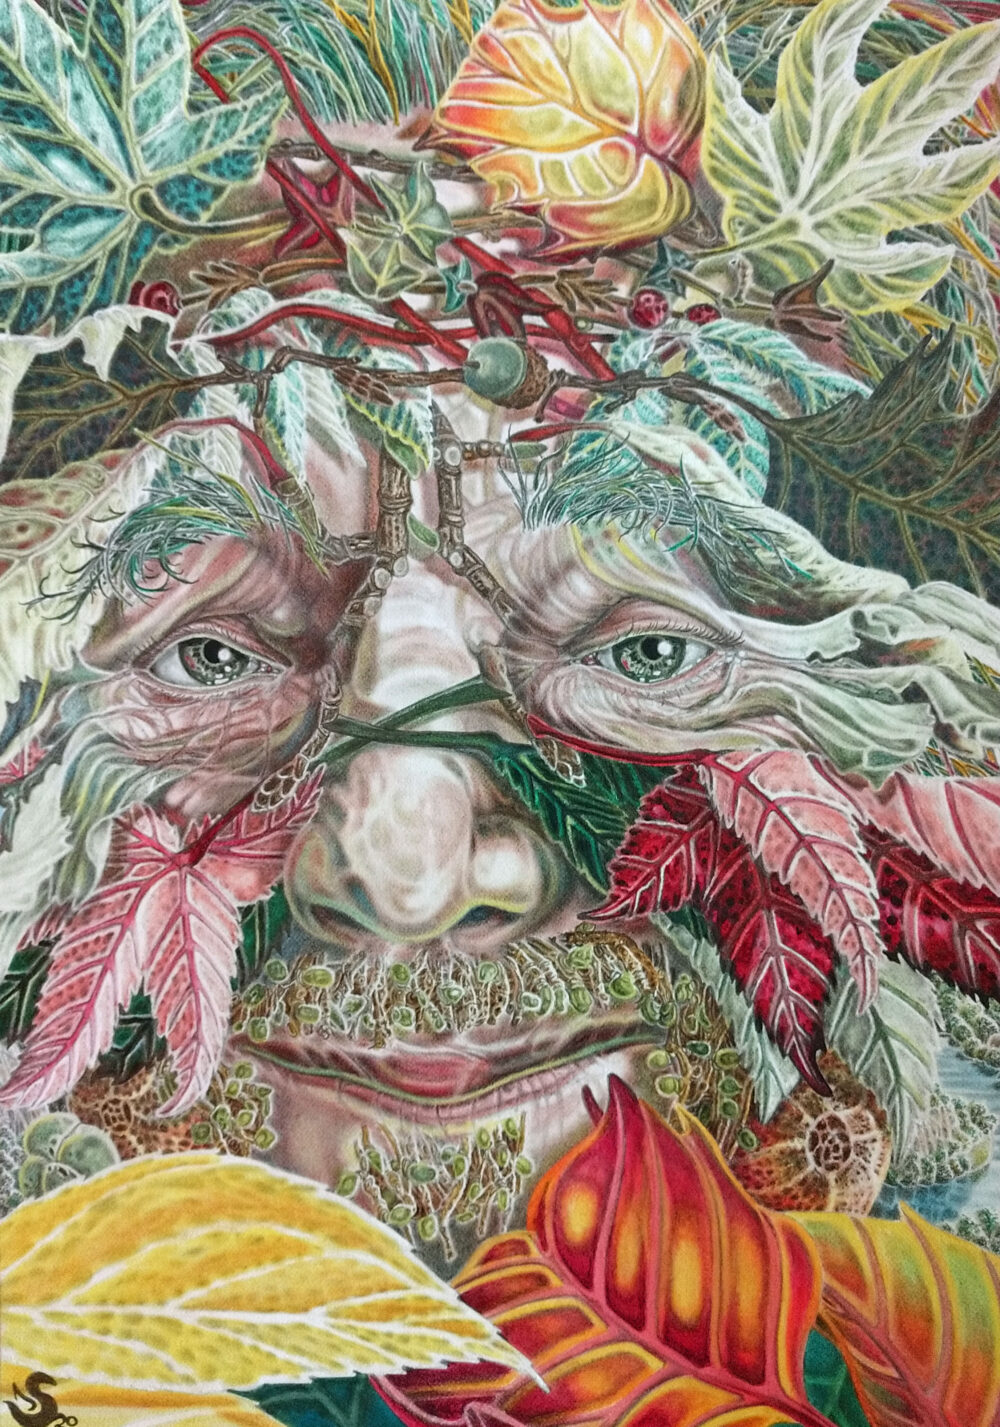 THE GREEN MAN looks out from his woodland of leaves, vines and berries that have enmeshed him